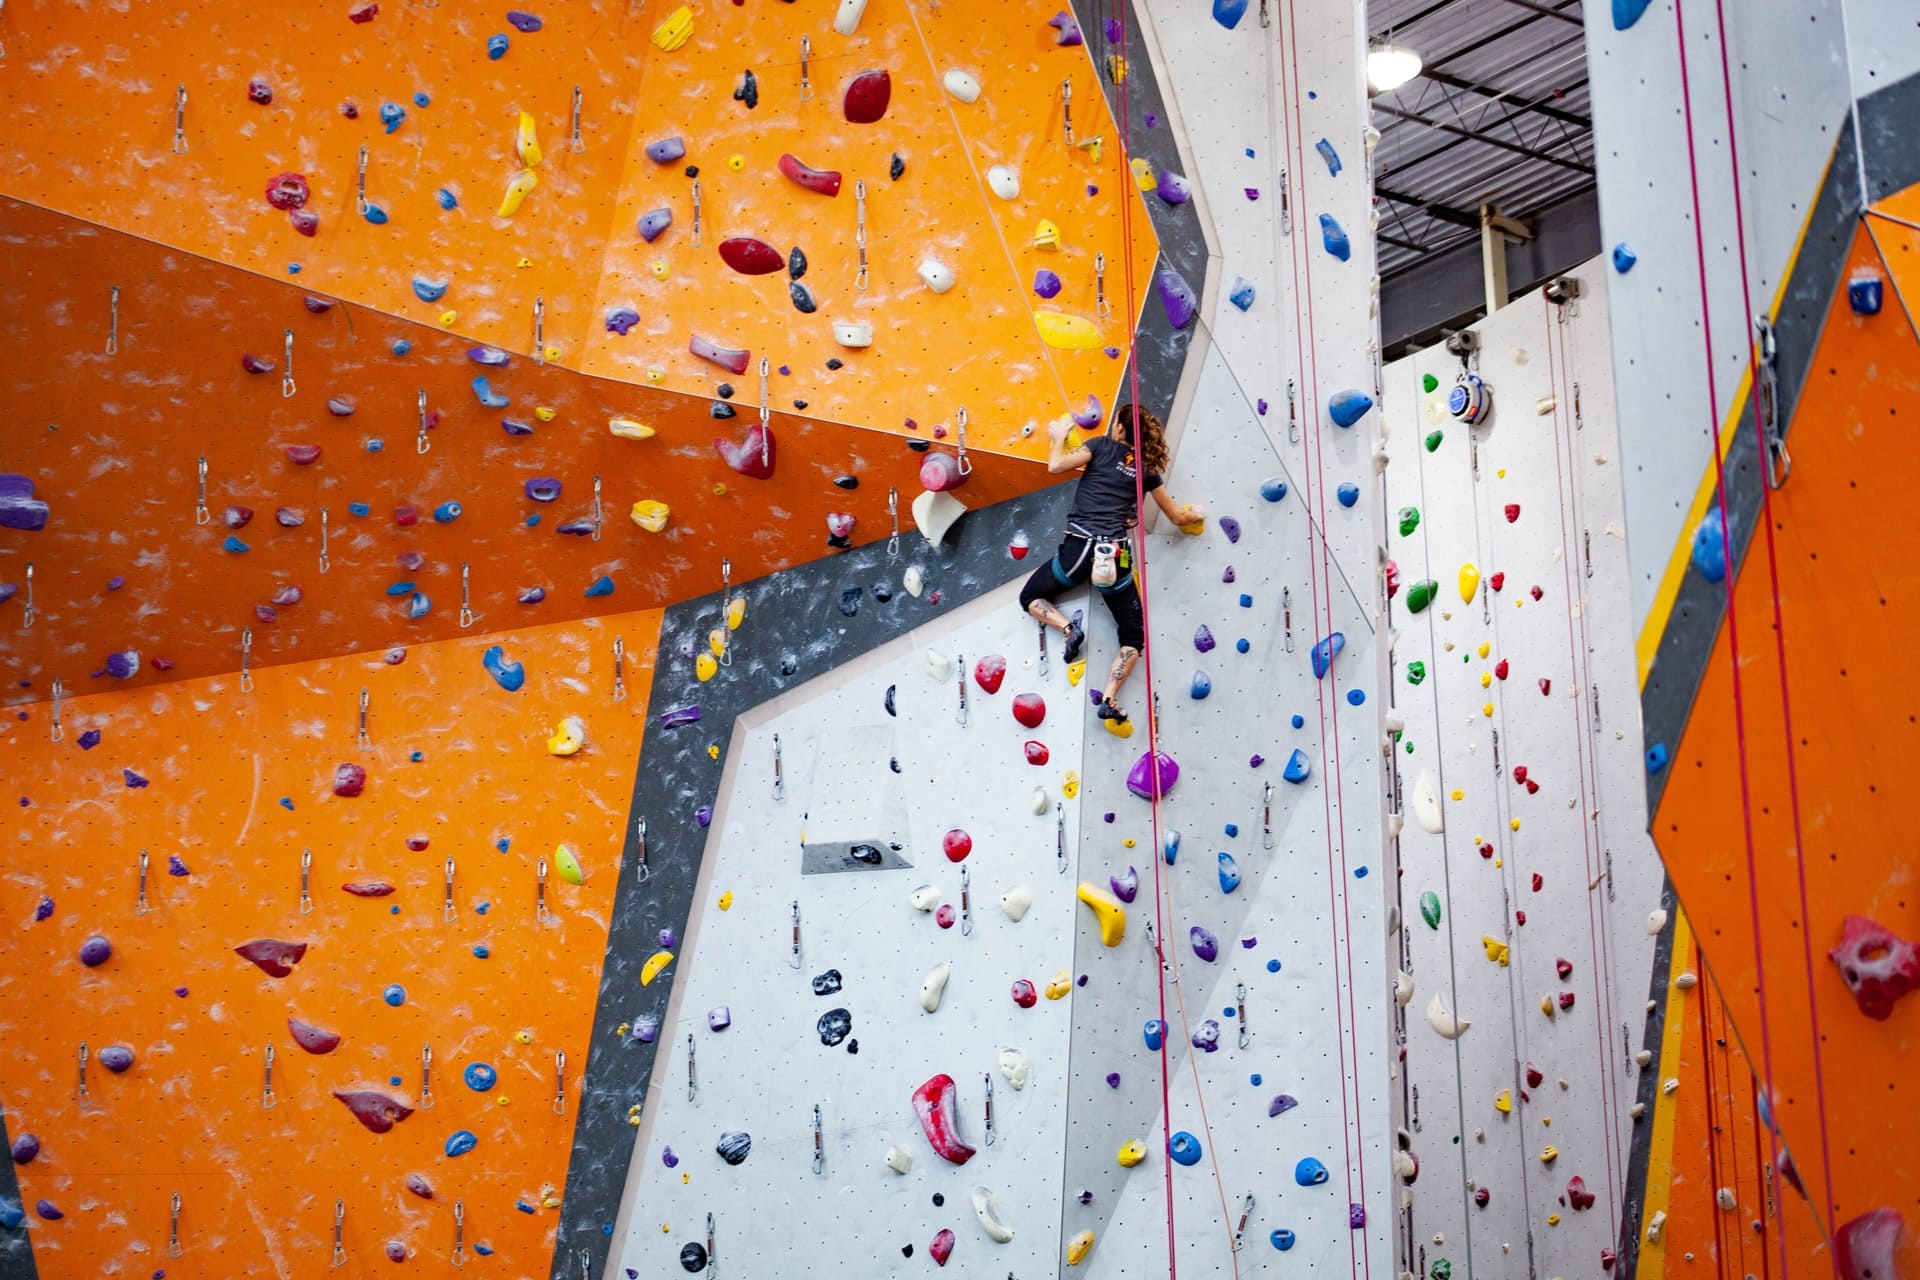 Do you want to start a climbing wall adventure? Check out how to get started